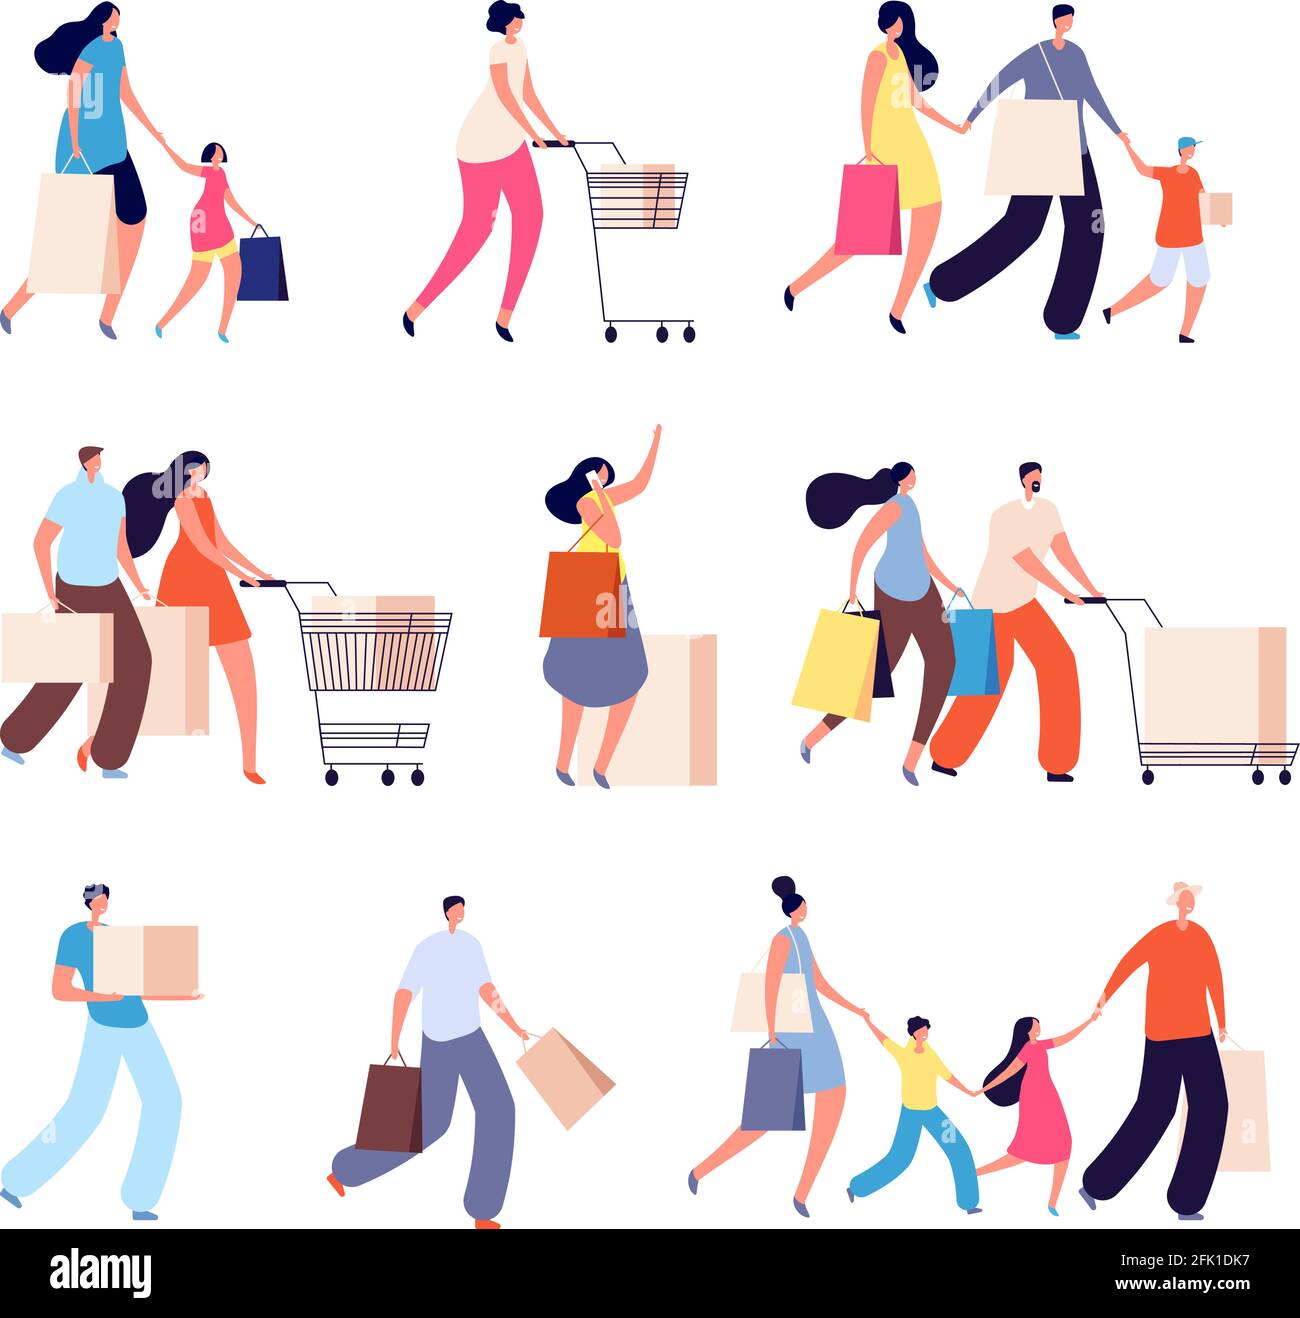 Family shopping. Consumers, woman buy food or clothes. Isolated people with bag for shop. Kids and adult fashion shoppers vector characters Stock Vector